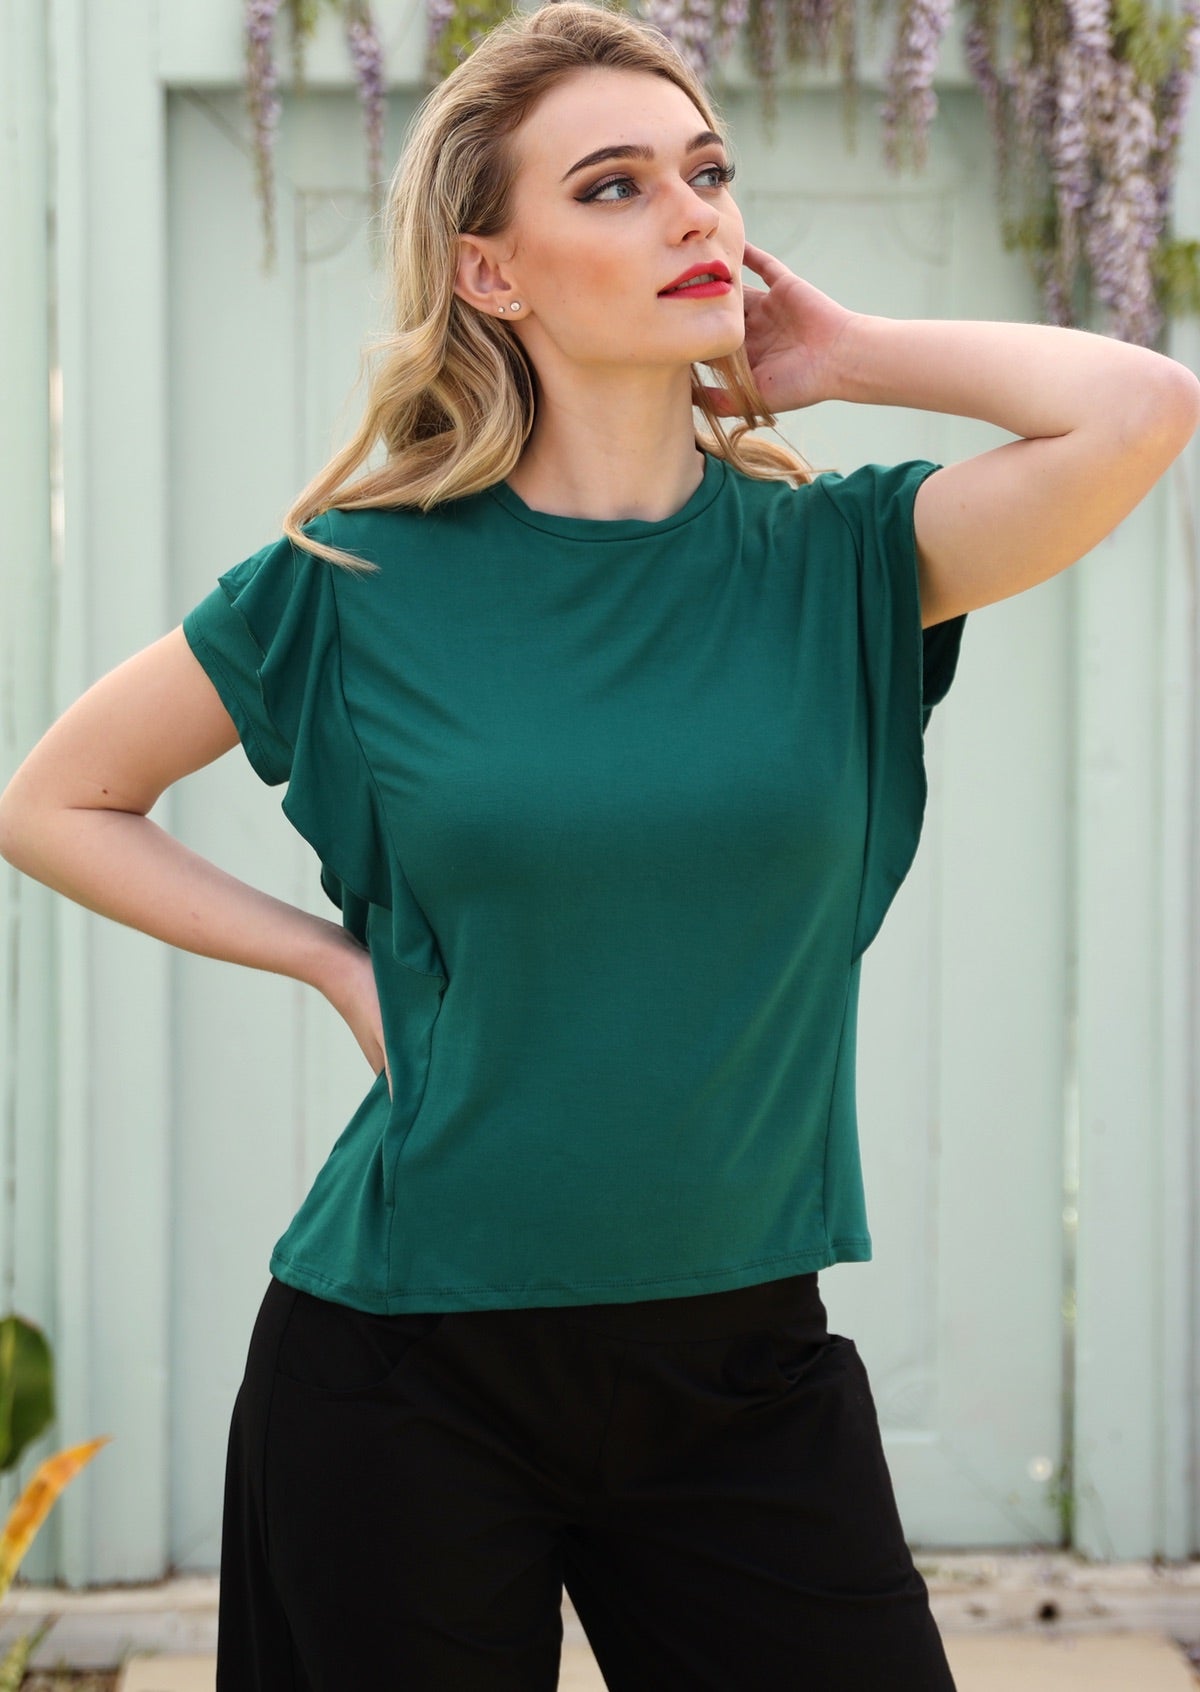 Woman with blonde hair wearing a ruffle green round neck short cap sleeve rayon top.